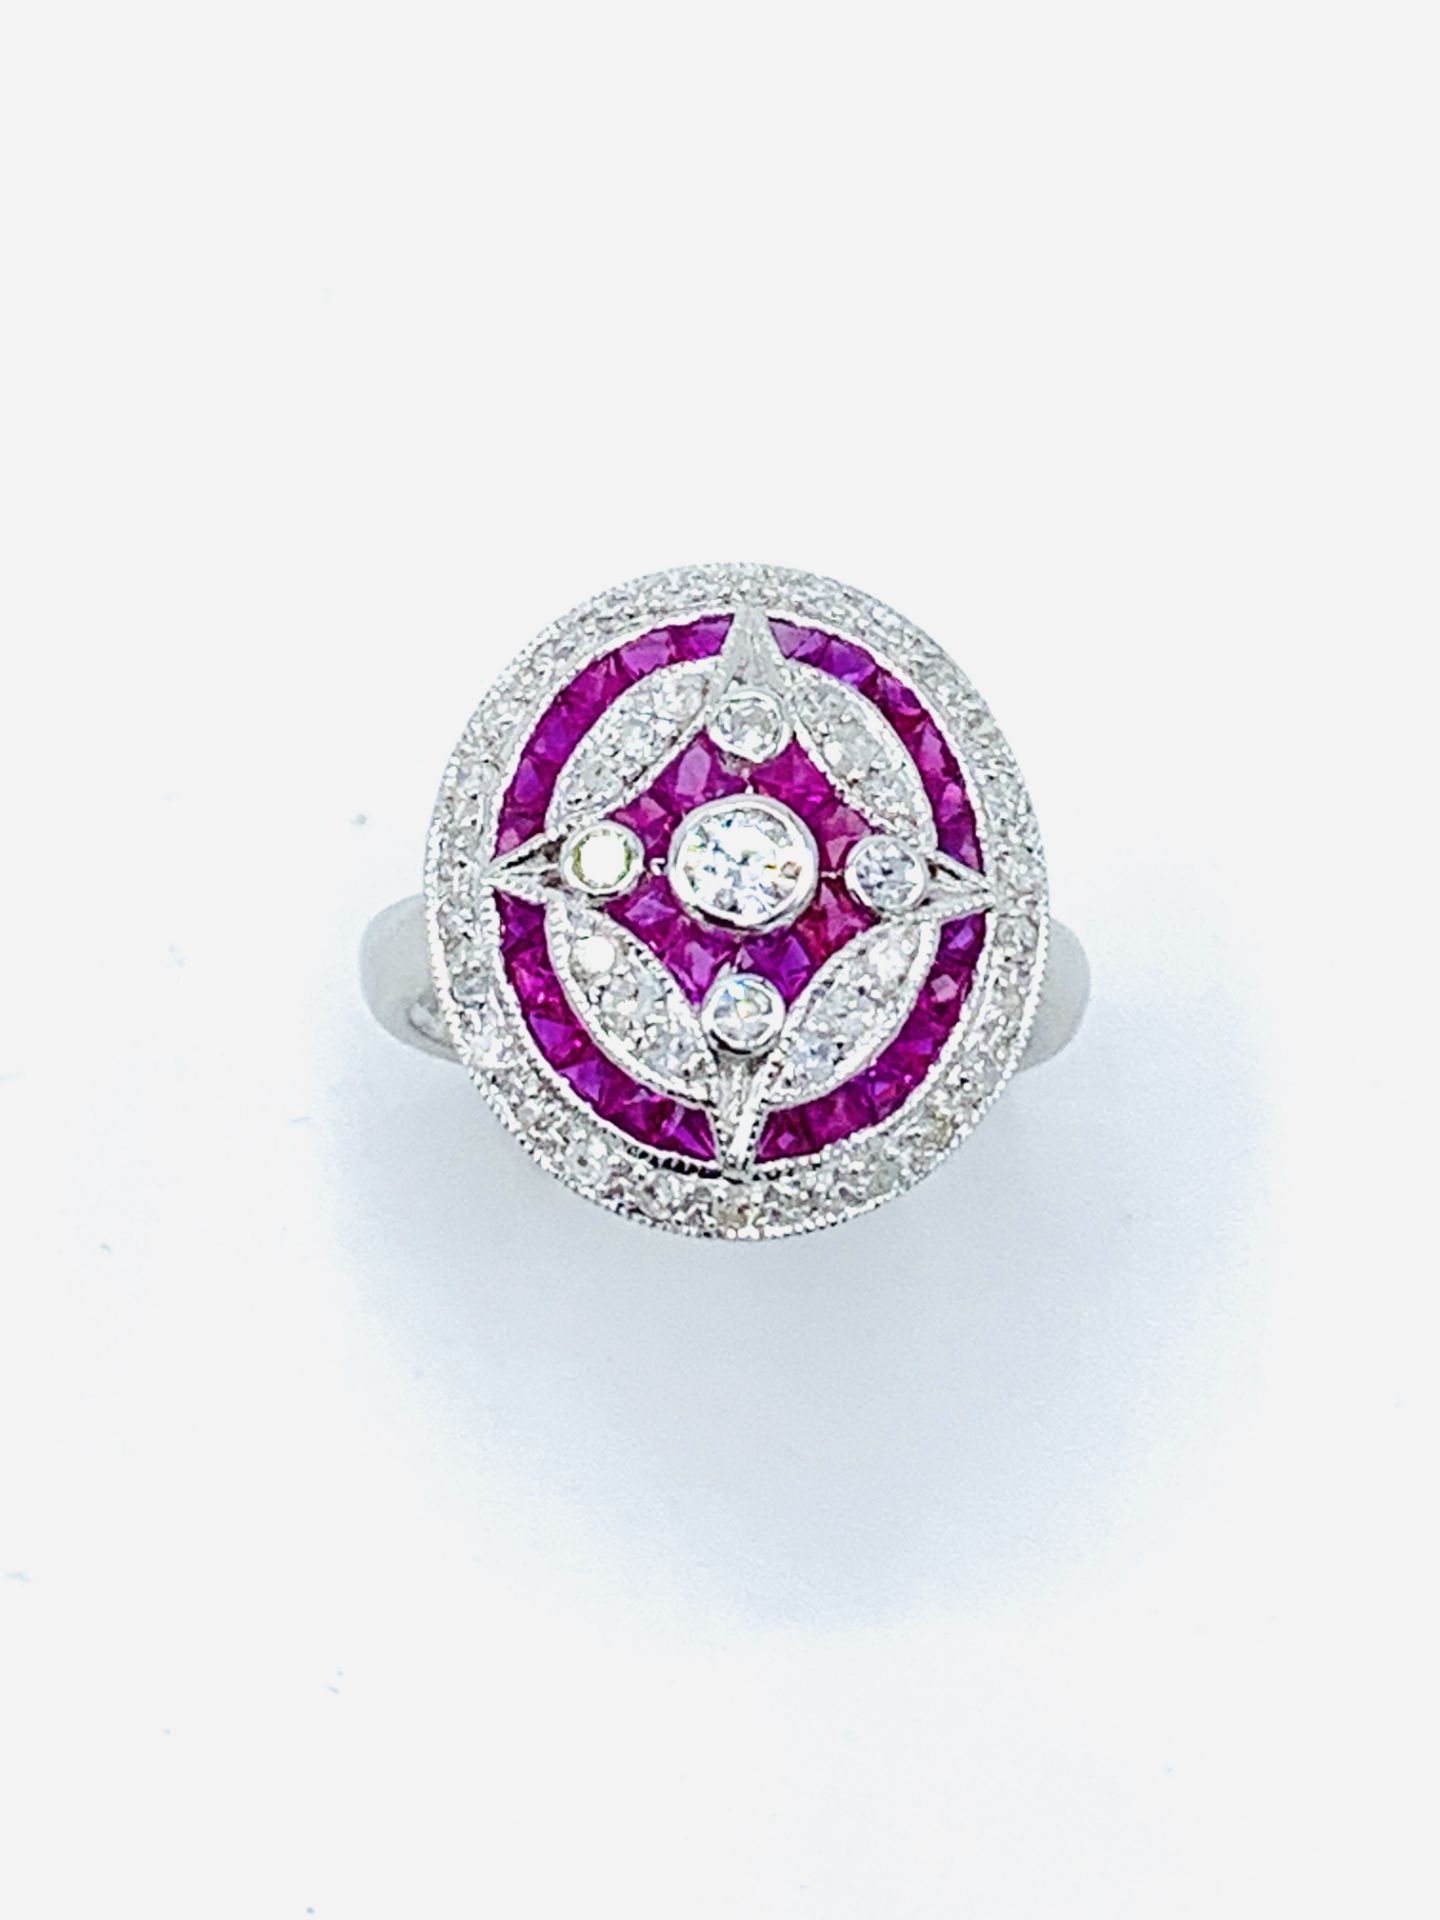 14ct white gold ruby and diamond target ring. - Image 5 of 5